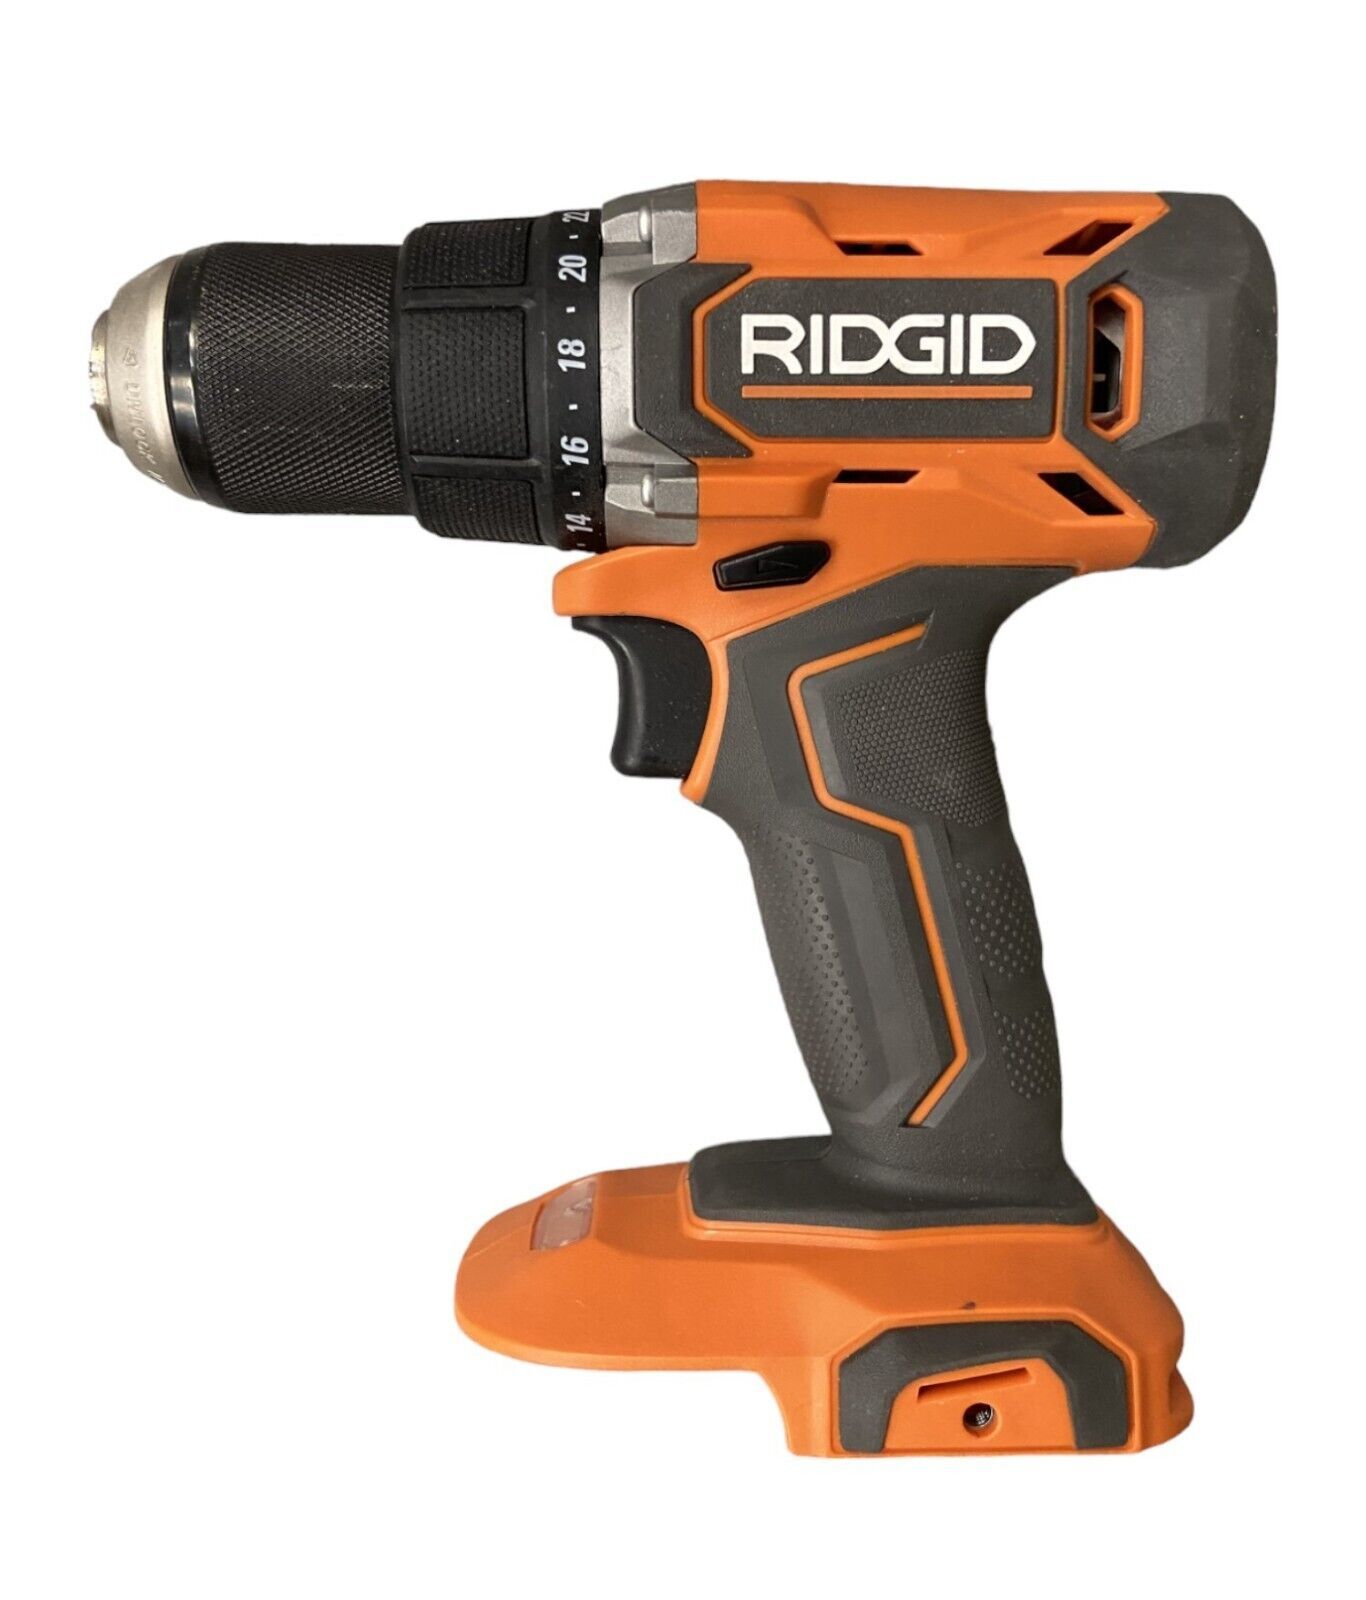 Primary image for USED - RIDGID R860010 1/2" 18V 18Volt Drill/Driver (Tool Only)